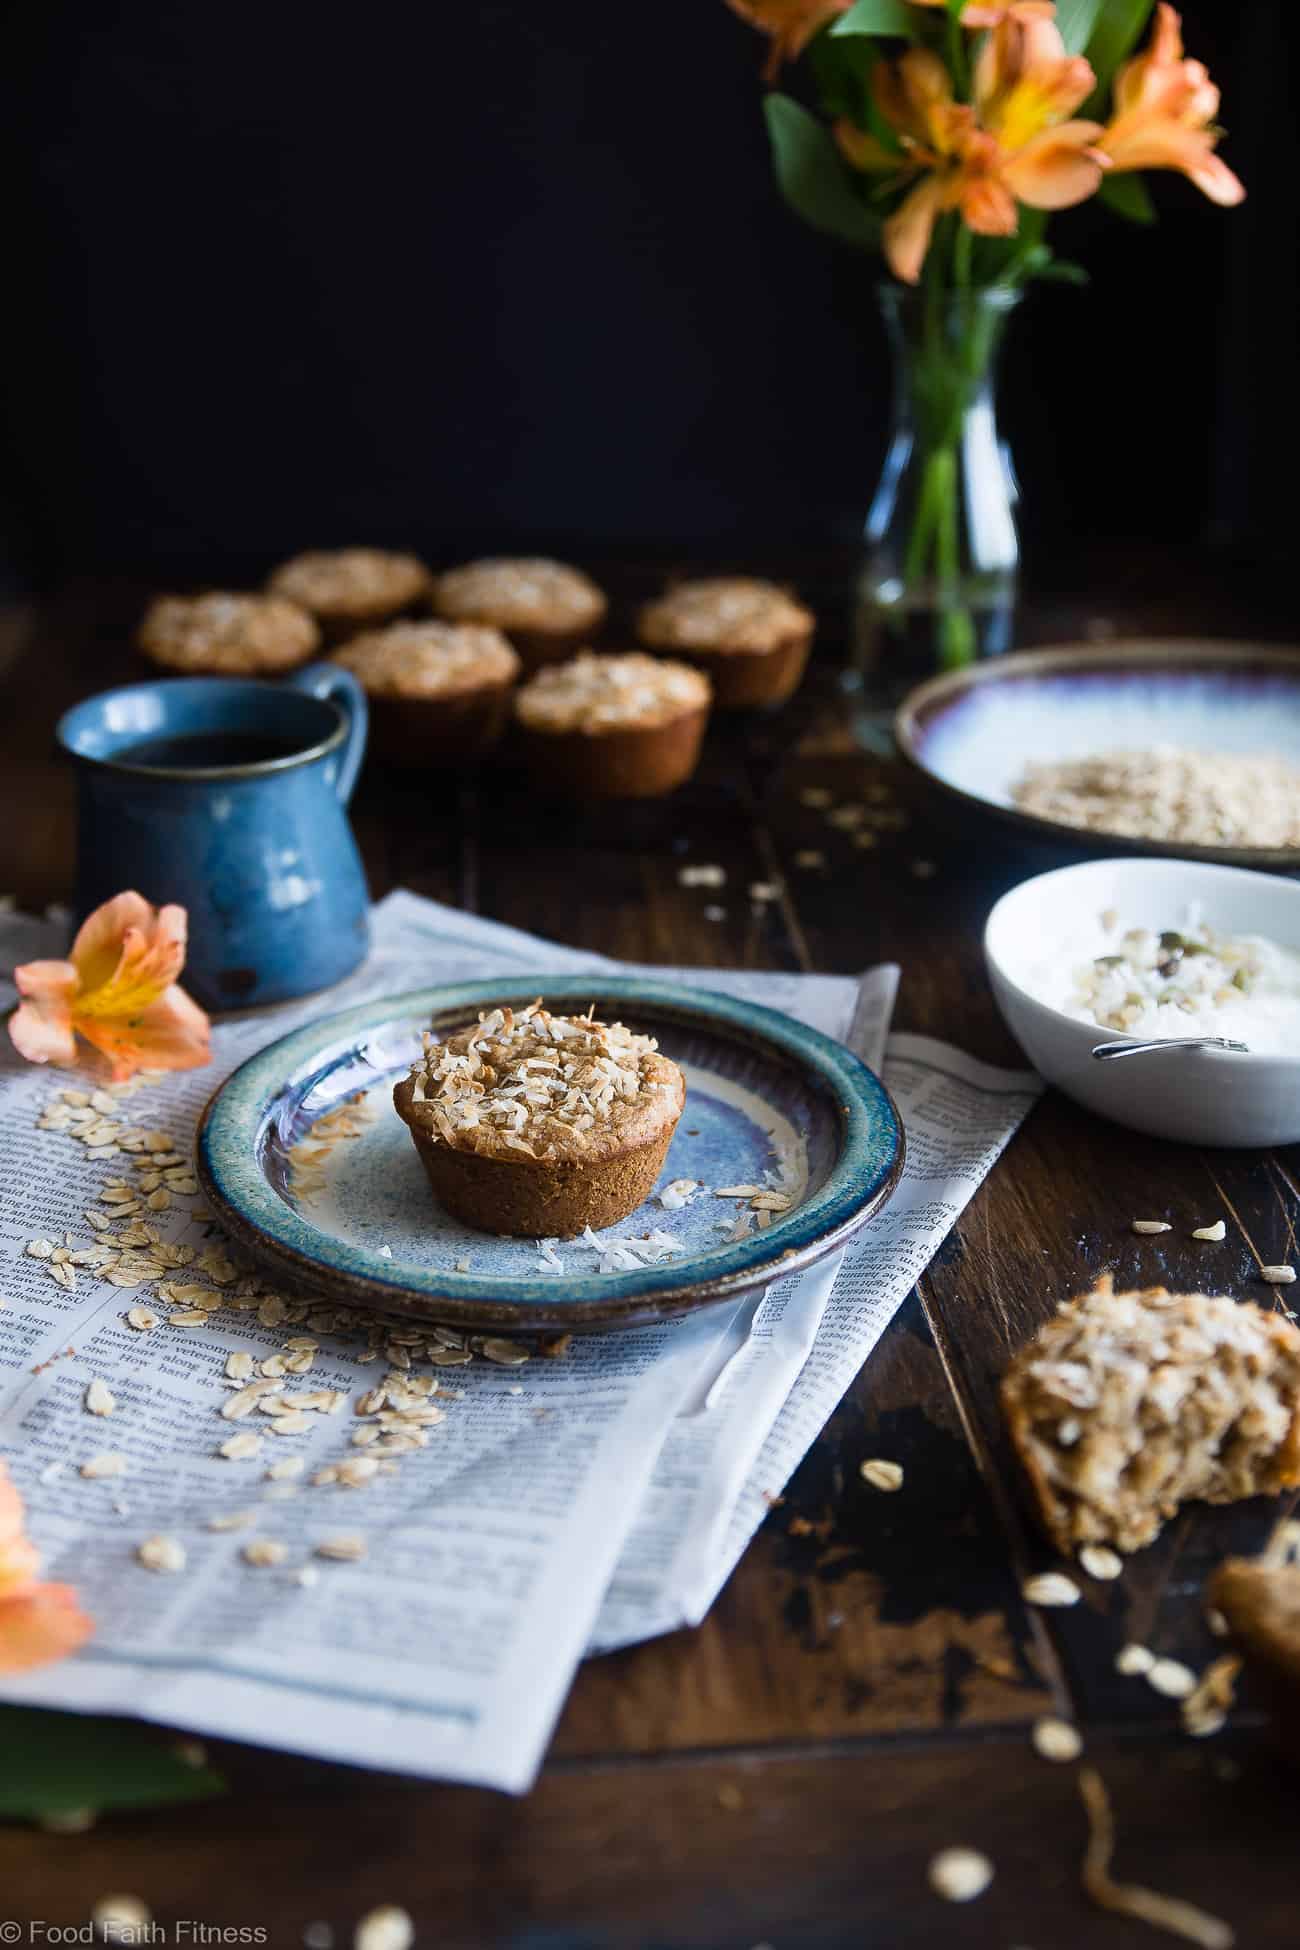 Flourless Oatmeal Applesauce Almond Butter Muffins - These healthy, dairy free muffins are made with simple, wholesome ingredients like oatmeal and almond butter and topped with coconut! They use applesauce instead of oil to keep them SO moist! | #Foodfaithfitness | #Glutenfree #Healthy #Almondbutter #Coconut #Muffins